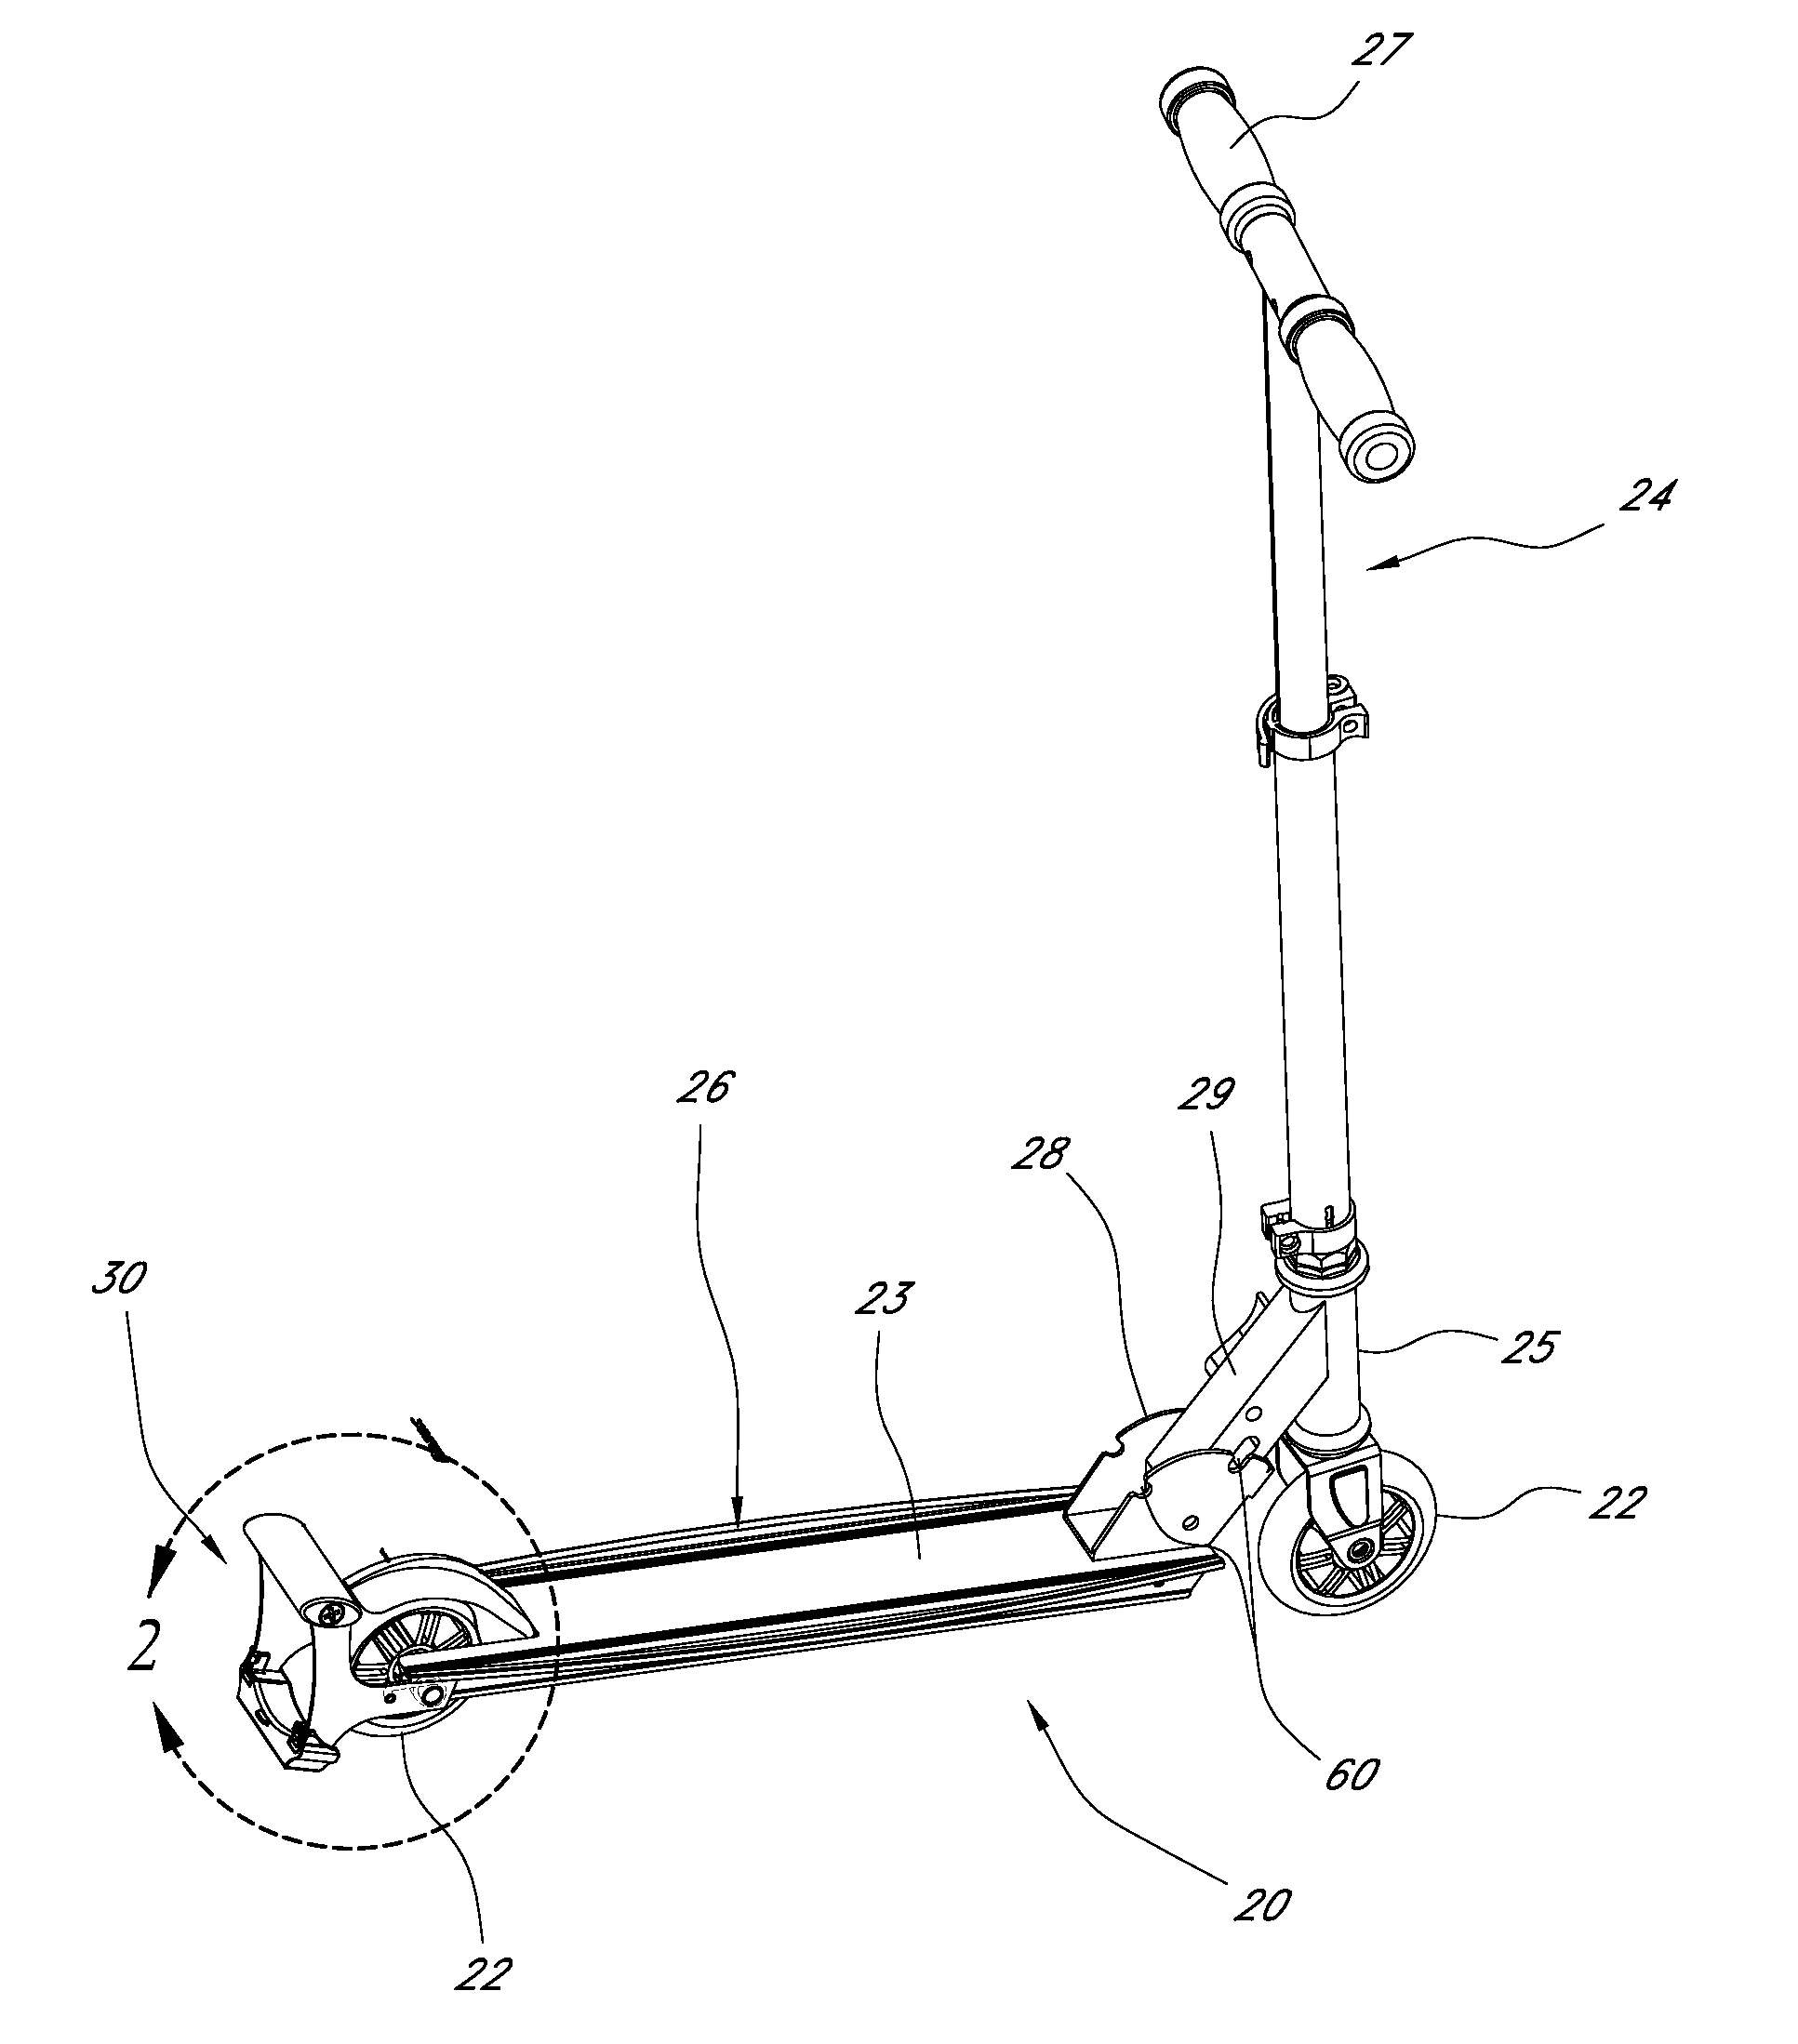 Spark generating device for scooter and removable spark generating cartridge